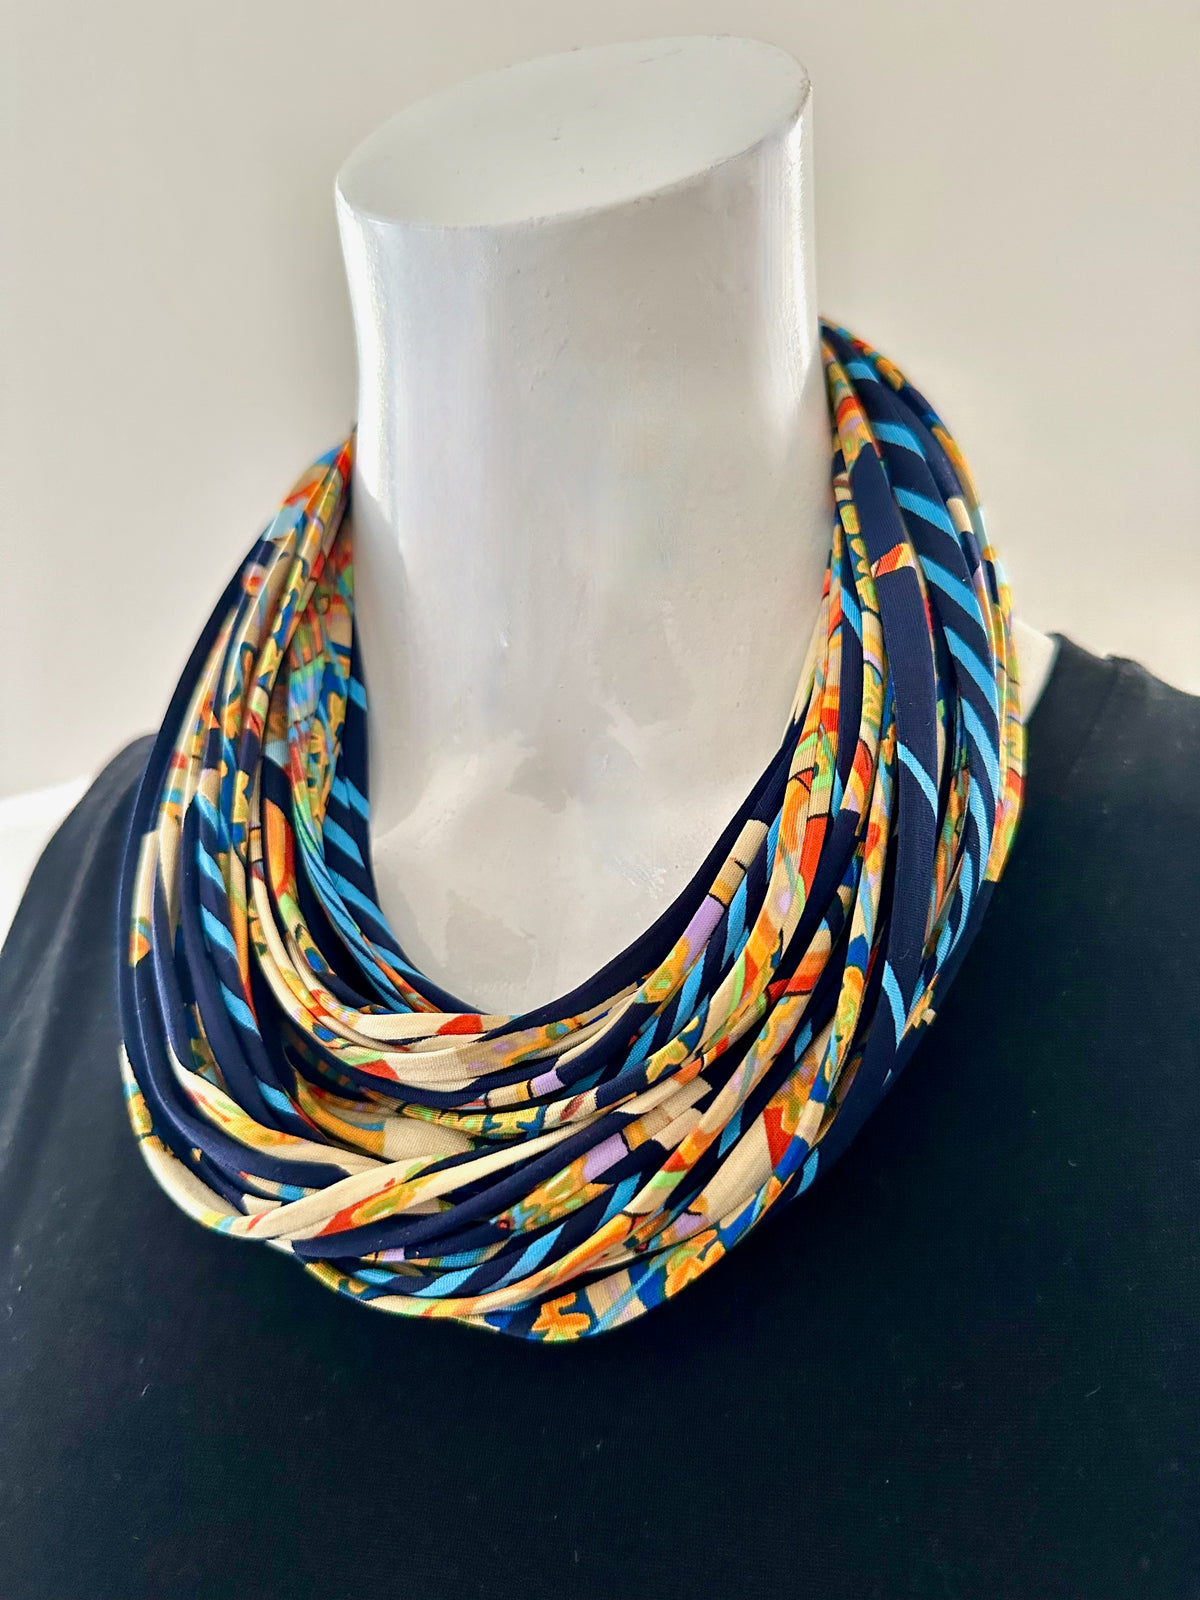 Navy Blue and Yellow Infinity Scarf Necklace